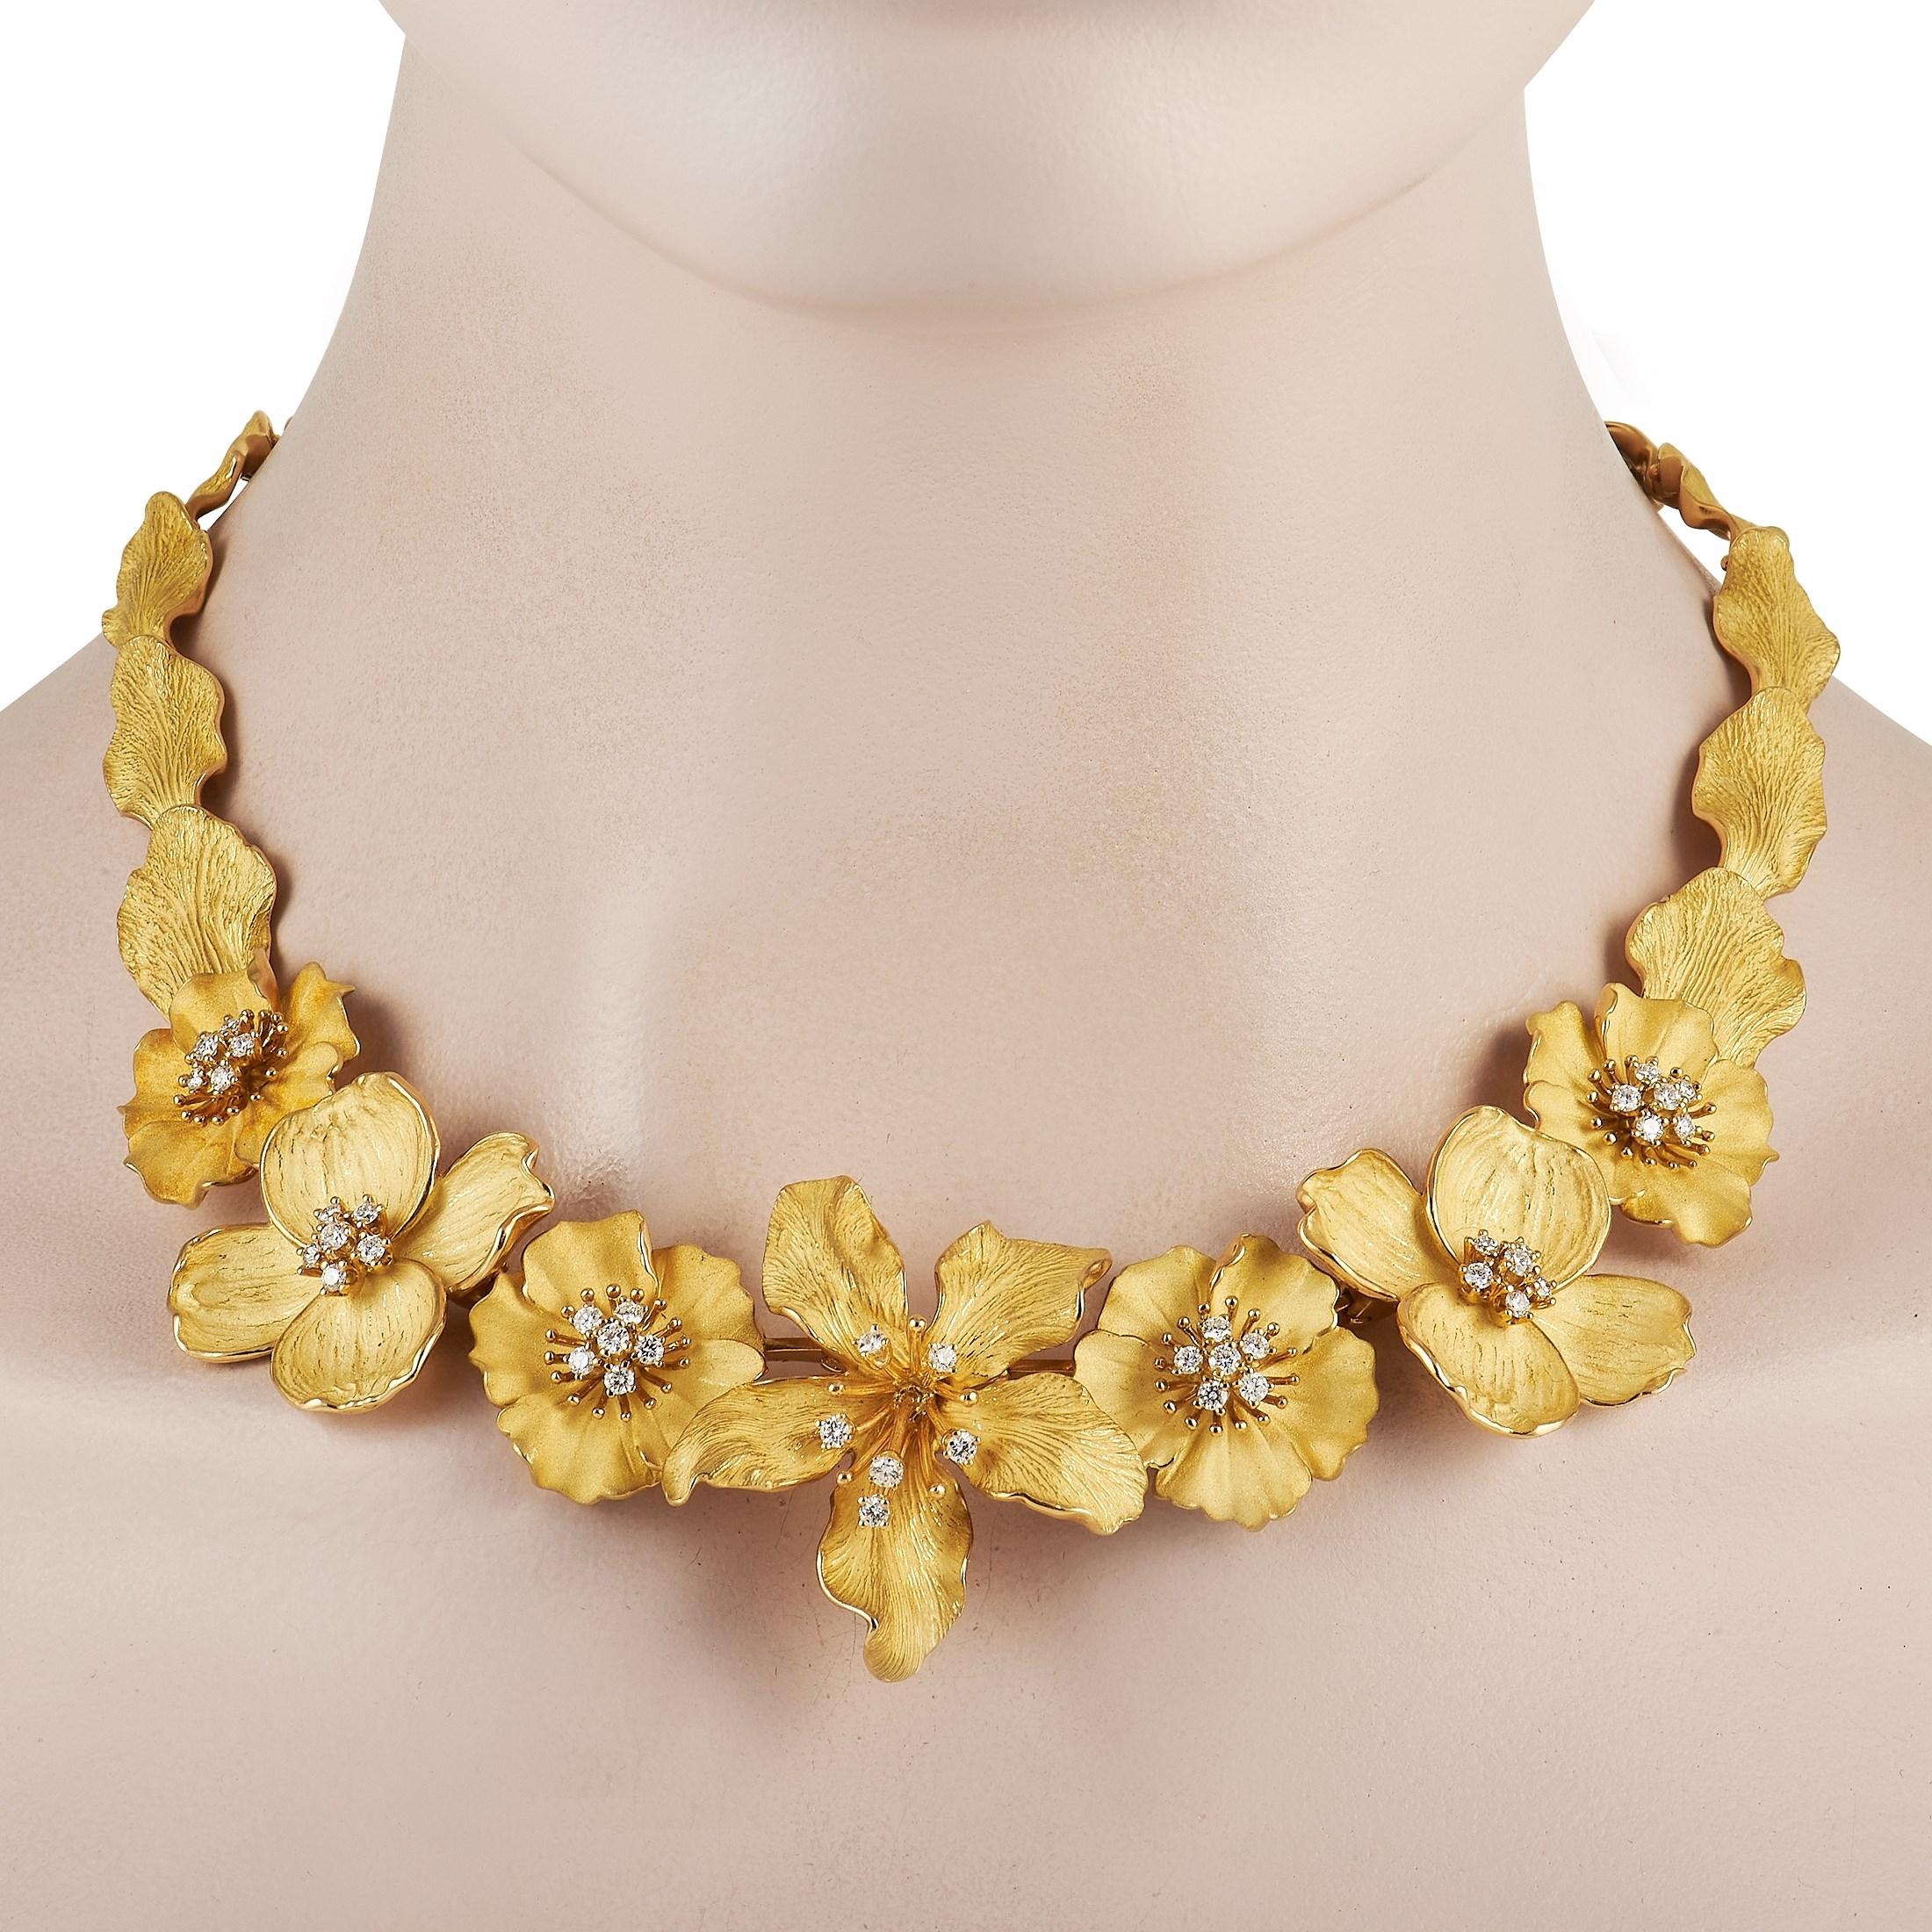 Delicate yet bold, this exquisite yellow gold necklace from Tiffany & Co.'s Dogwood Collection can instantly jazz up any look. The 17-inch long necklace features a series of sculpted and textured floral and foliage motifs. The central set of seven